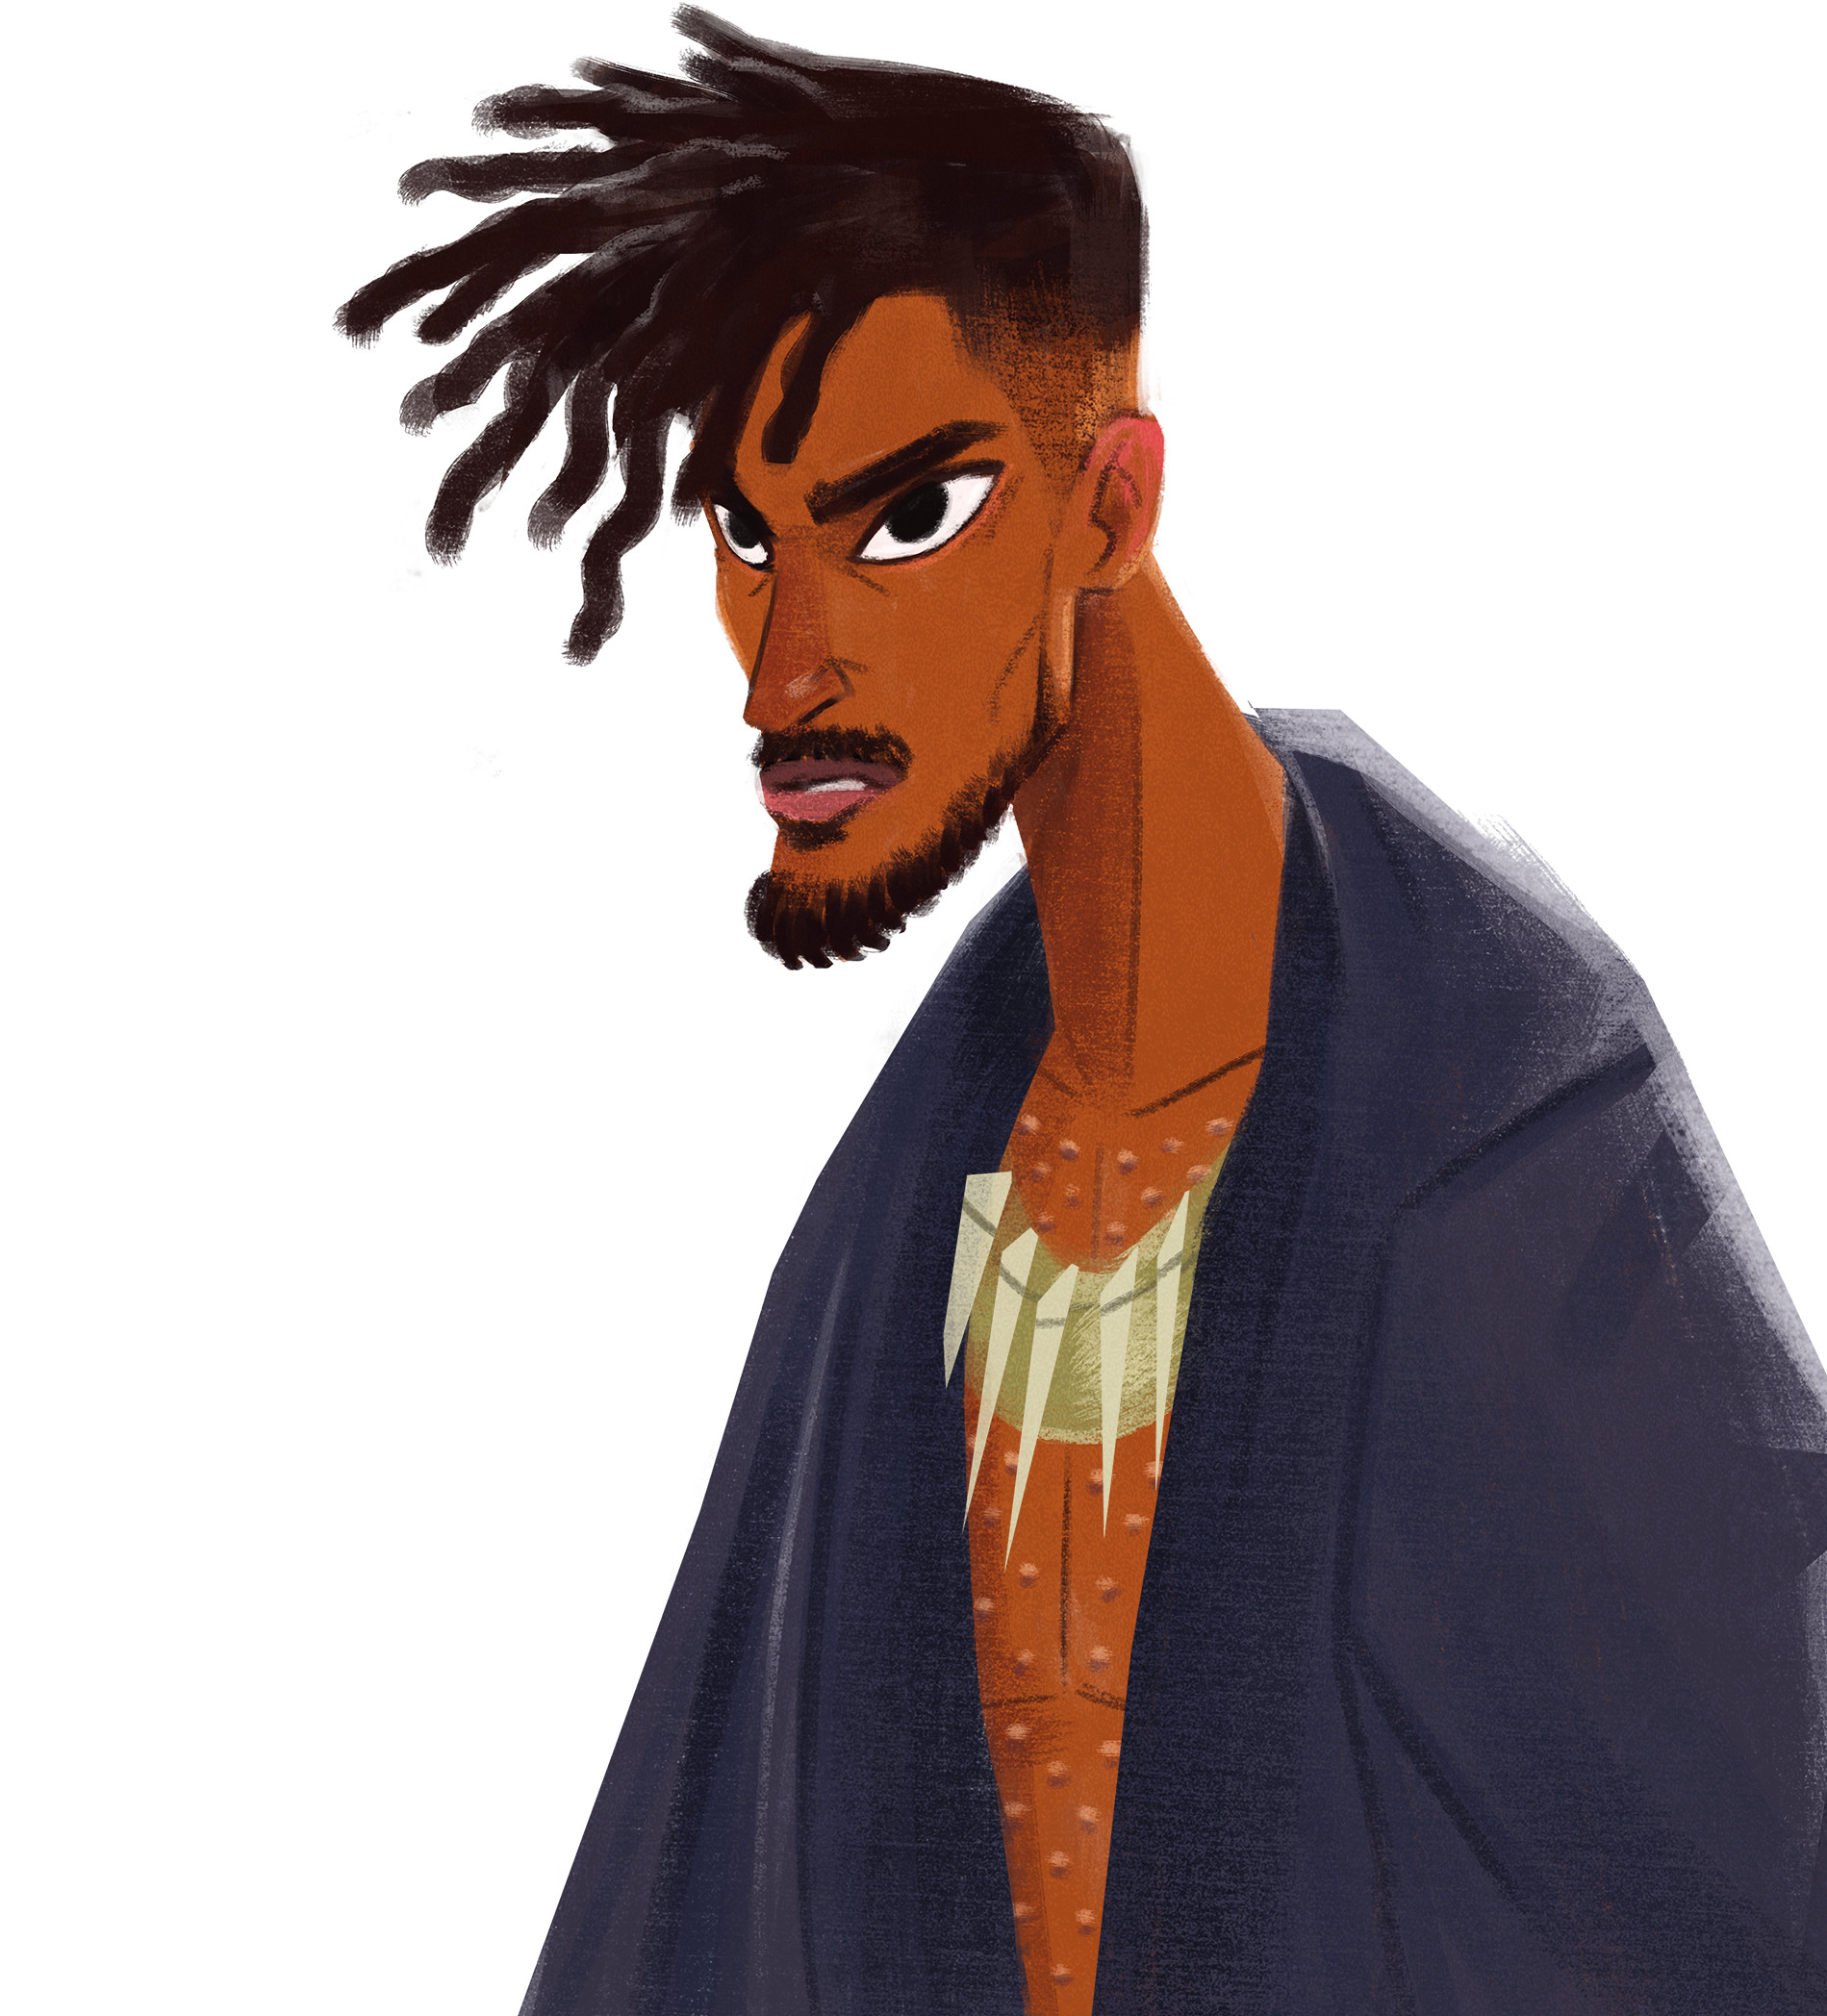 Probably gonna do plenty of Fan Art of the Black Panther characters! 